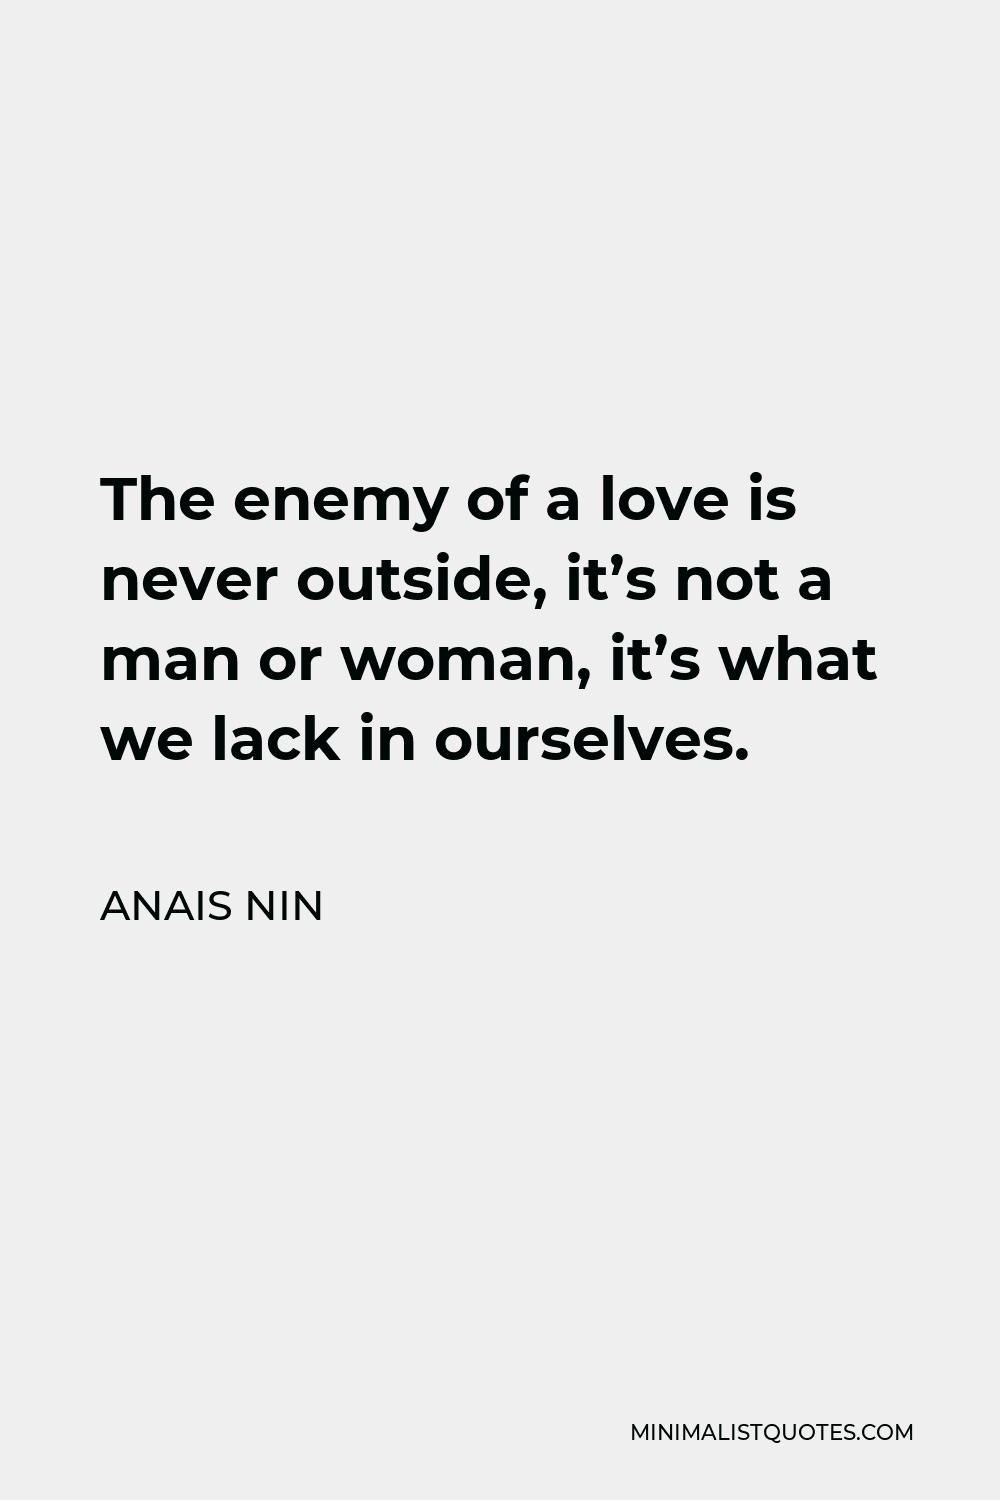 Anais Nin Quote - The enemy of a love is never outside, it’s not a man or woman, it’s what we lack in ourselves.